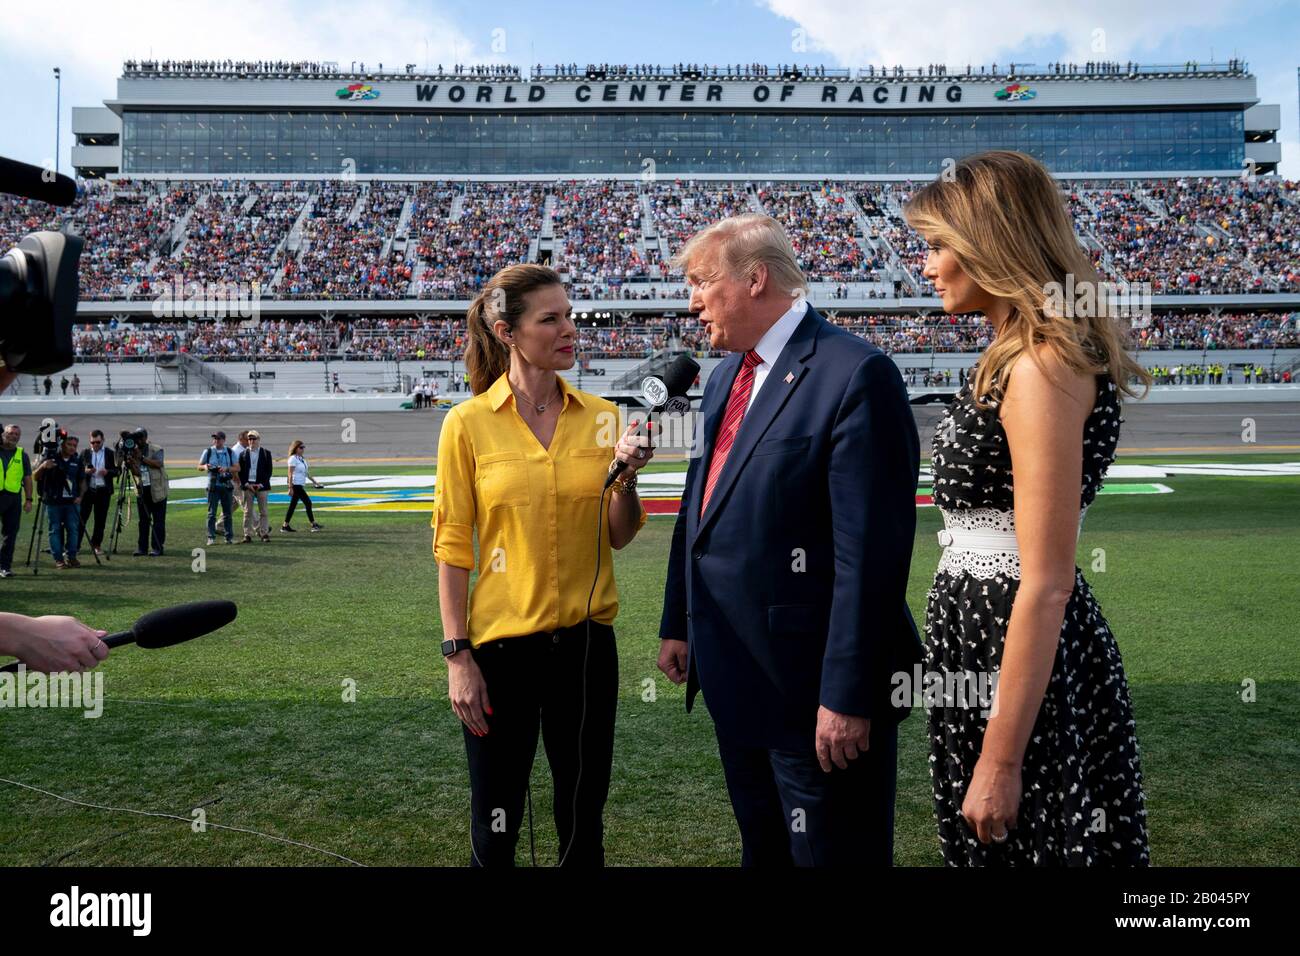 U.S President Donald Trump and First Lady Melania Trump are interviewed by Jamie Little of Fox Sports at Daytona International Speedway February 16, 2020 in Daytona Beach, Florida. Trump served as the official starter of the the NASCAR Daytona 500 auto race and took a ride in the presidential limousine around the track. Stock Photo